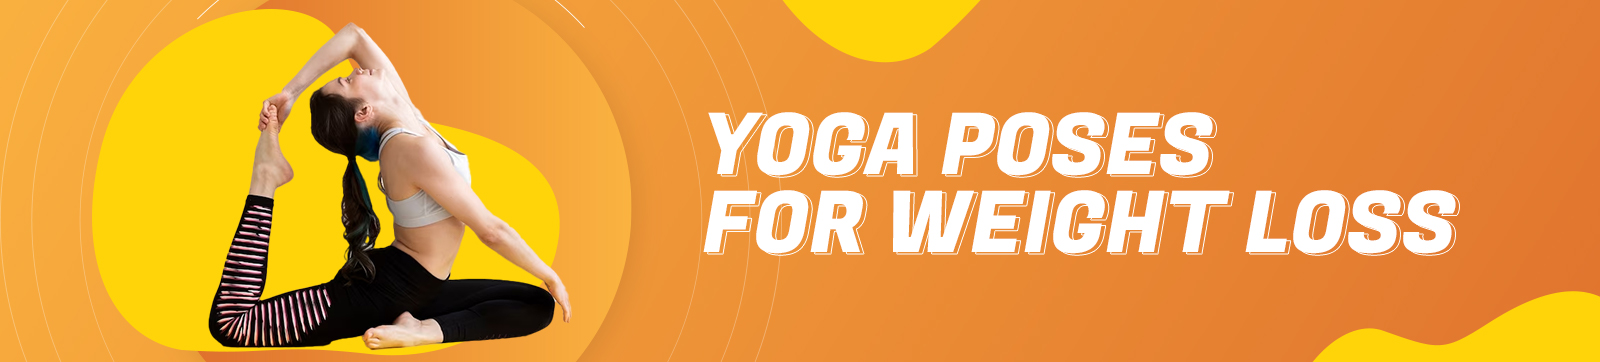 7 Best Yoga Poses for Weight Loss that Actually Work